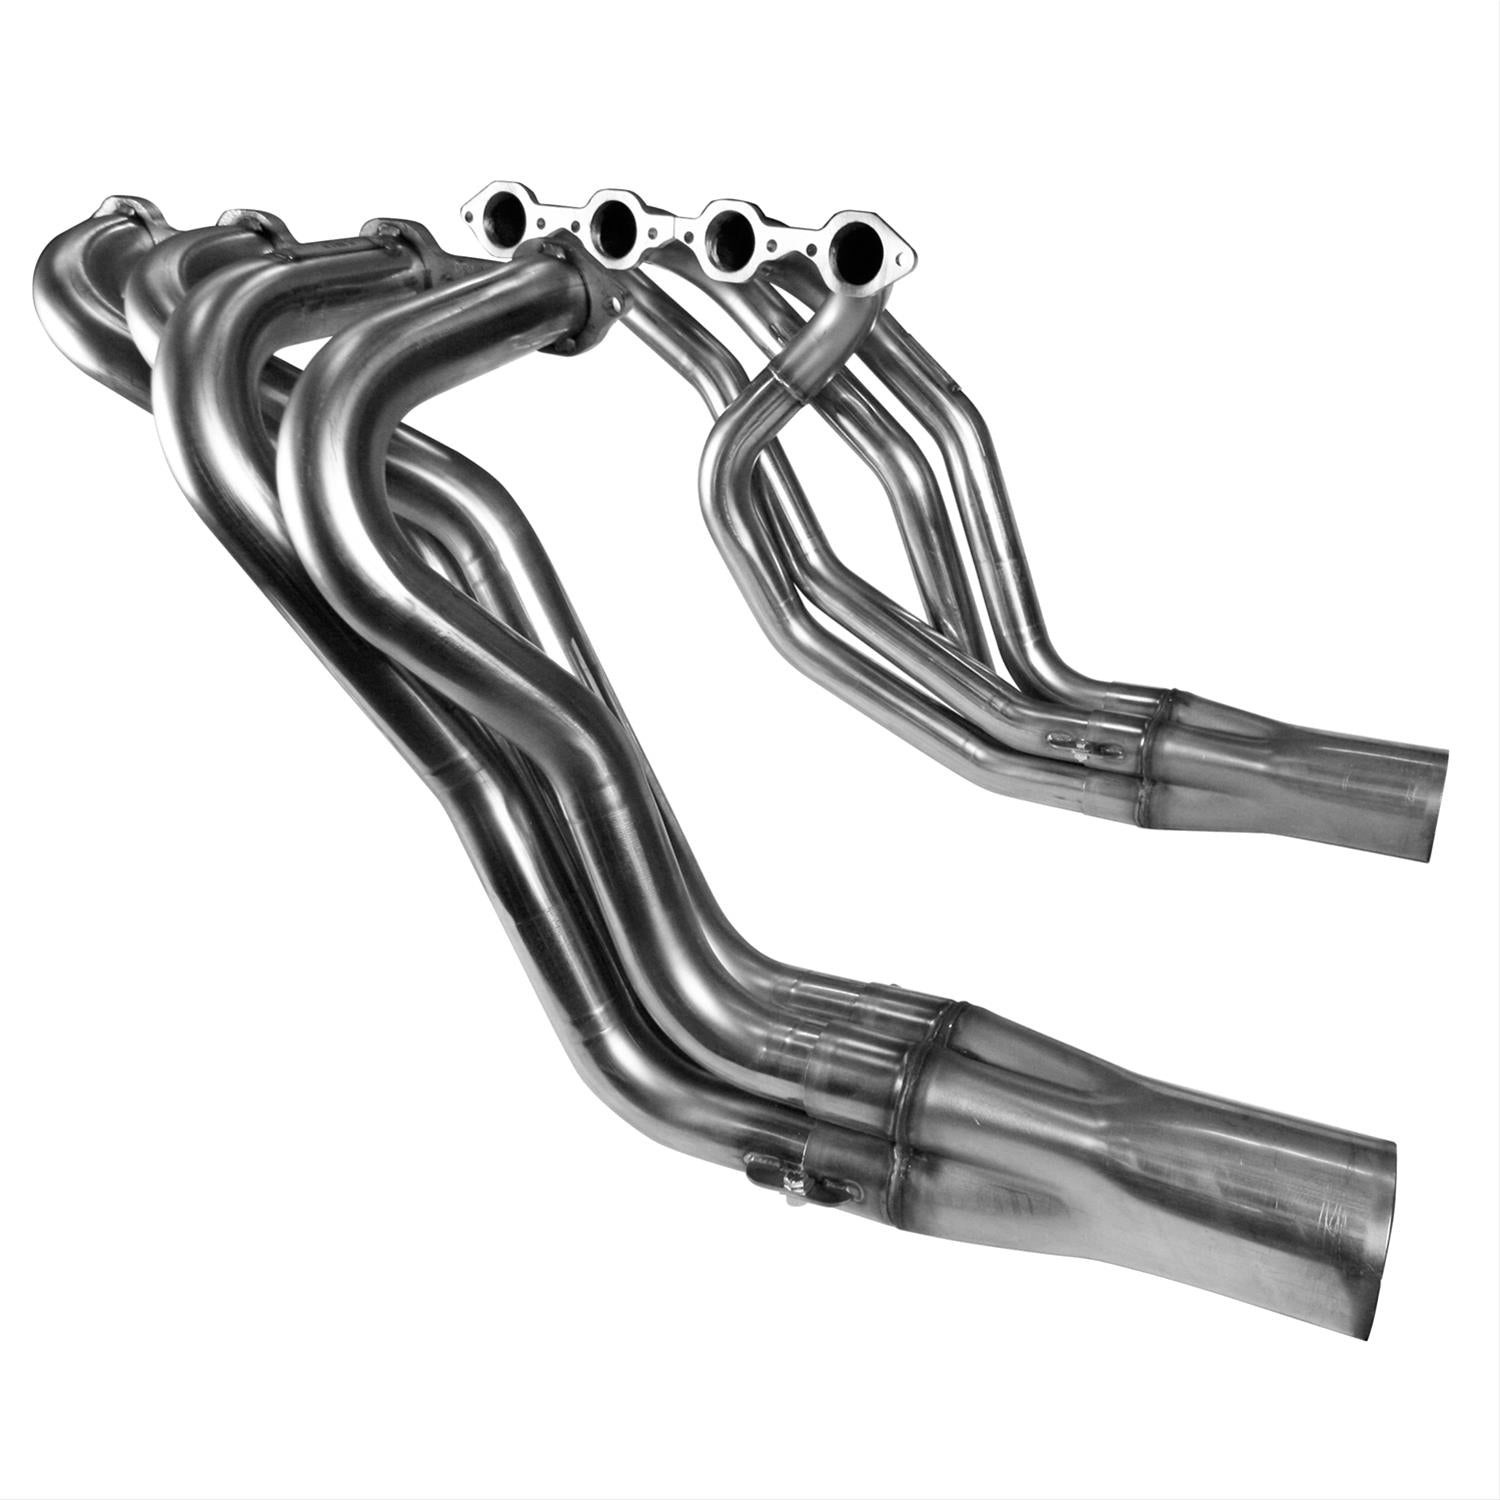 Kooks 1979-1993 Ford Mustang 2" X 3 1/2" Header For Dart & World Products 210 & 225 / Afr 205, 220, & 225 Cylinder Head 10151650